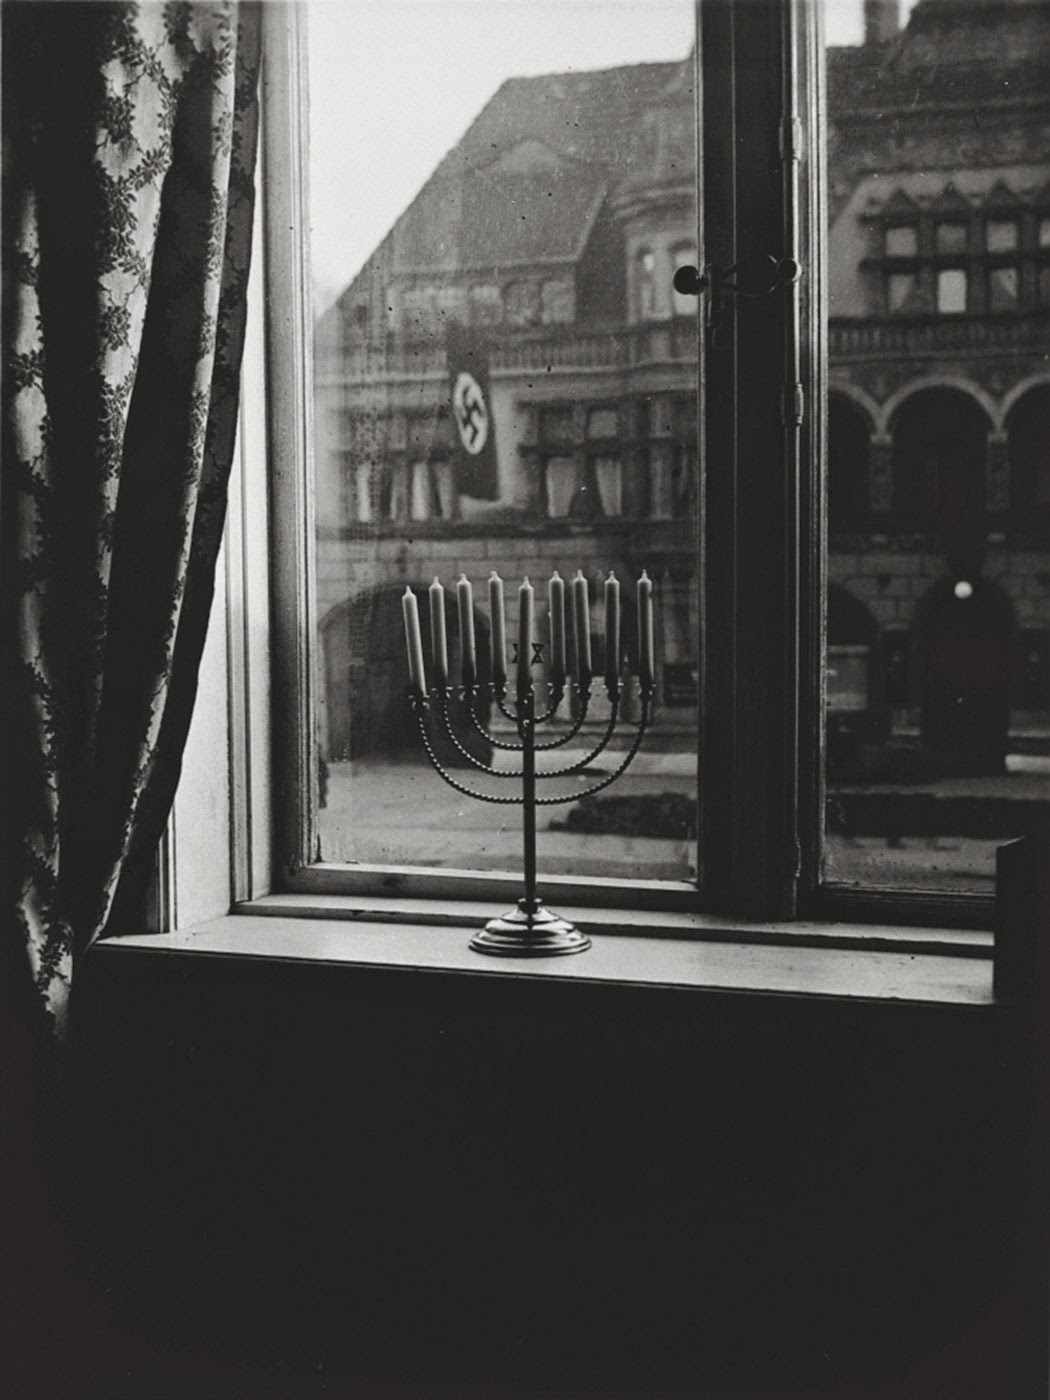 She wrote a few lines in German on the back of the photo. “Chanukah, 5692. ‘Judea dies’, thus says the banner. ‘Judea will live forever’, thus respond the lights.”